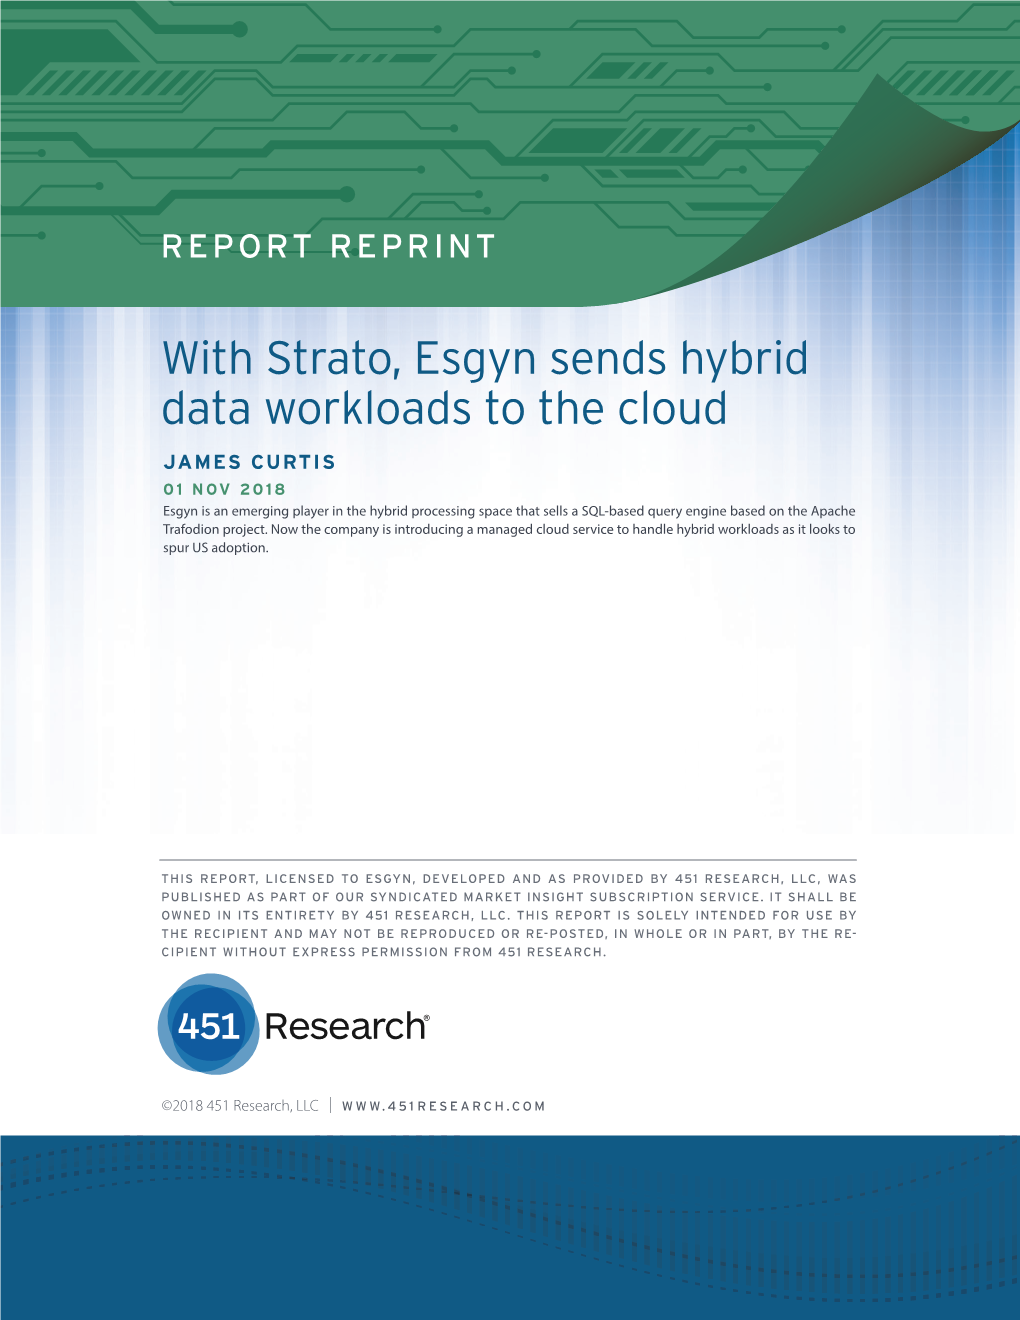 With Strato, Esgyn Sends Hybrid Data Workloads to the Cloud